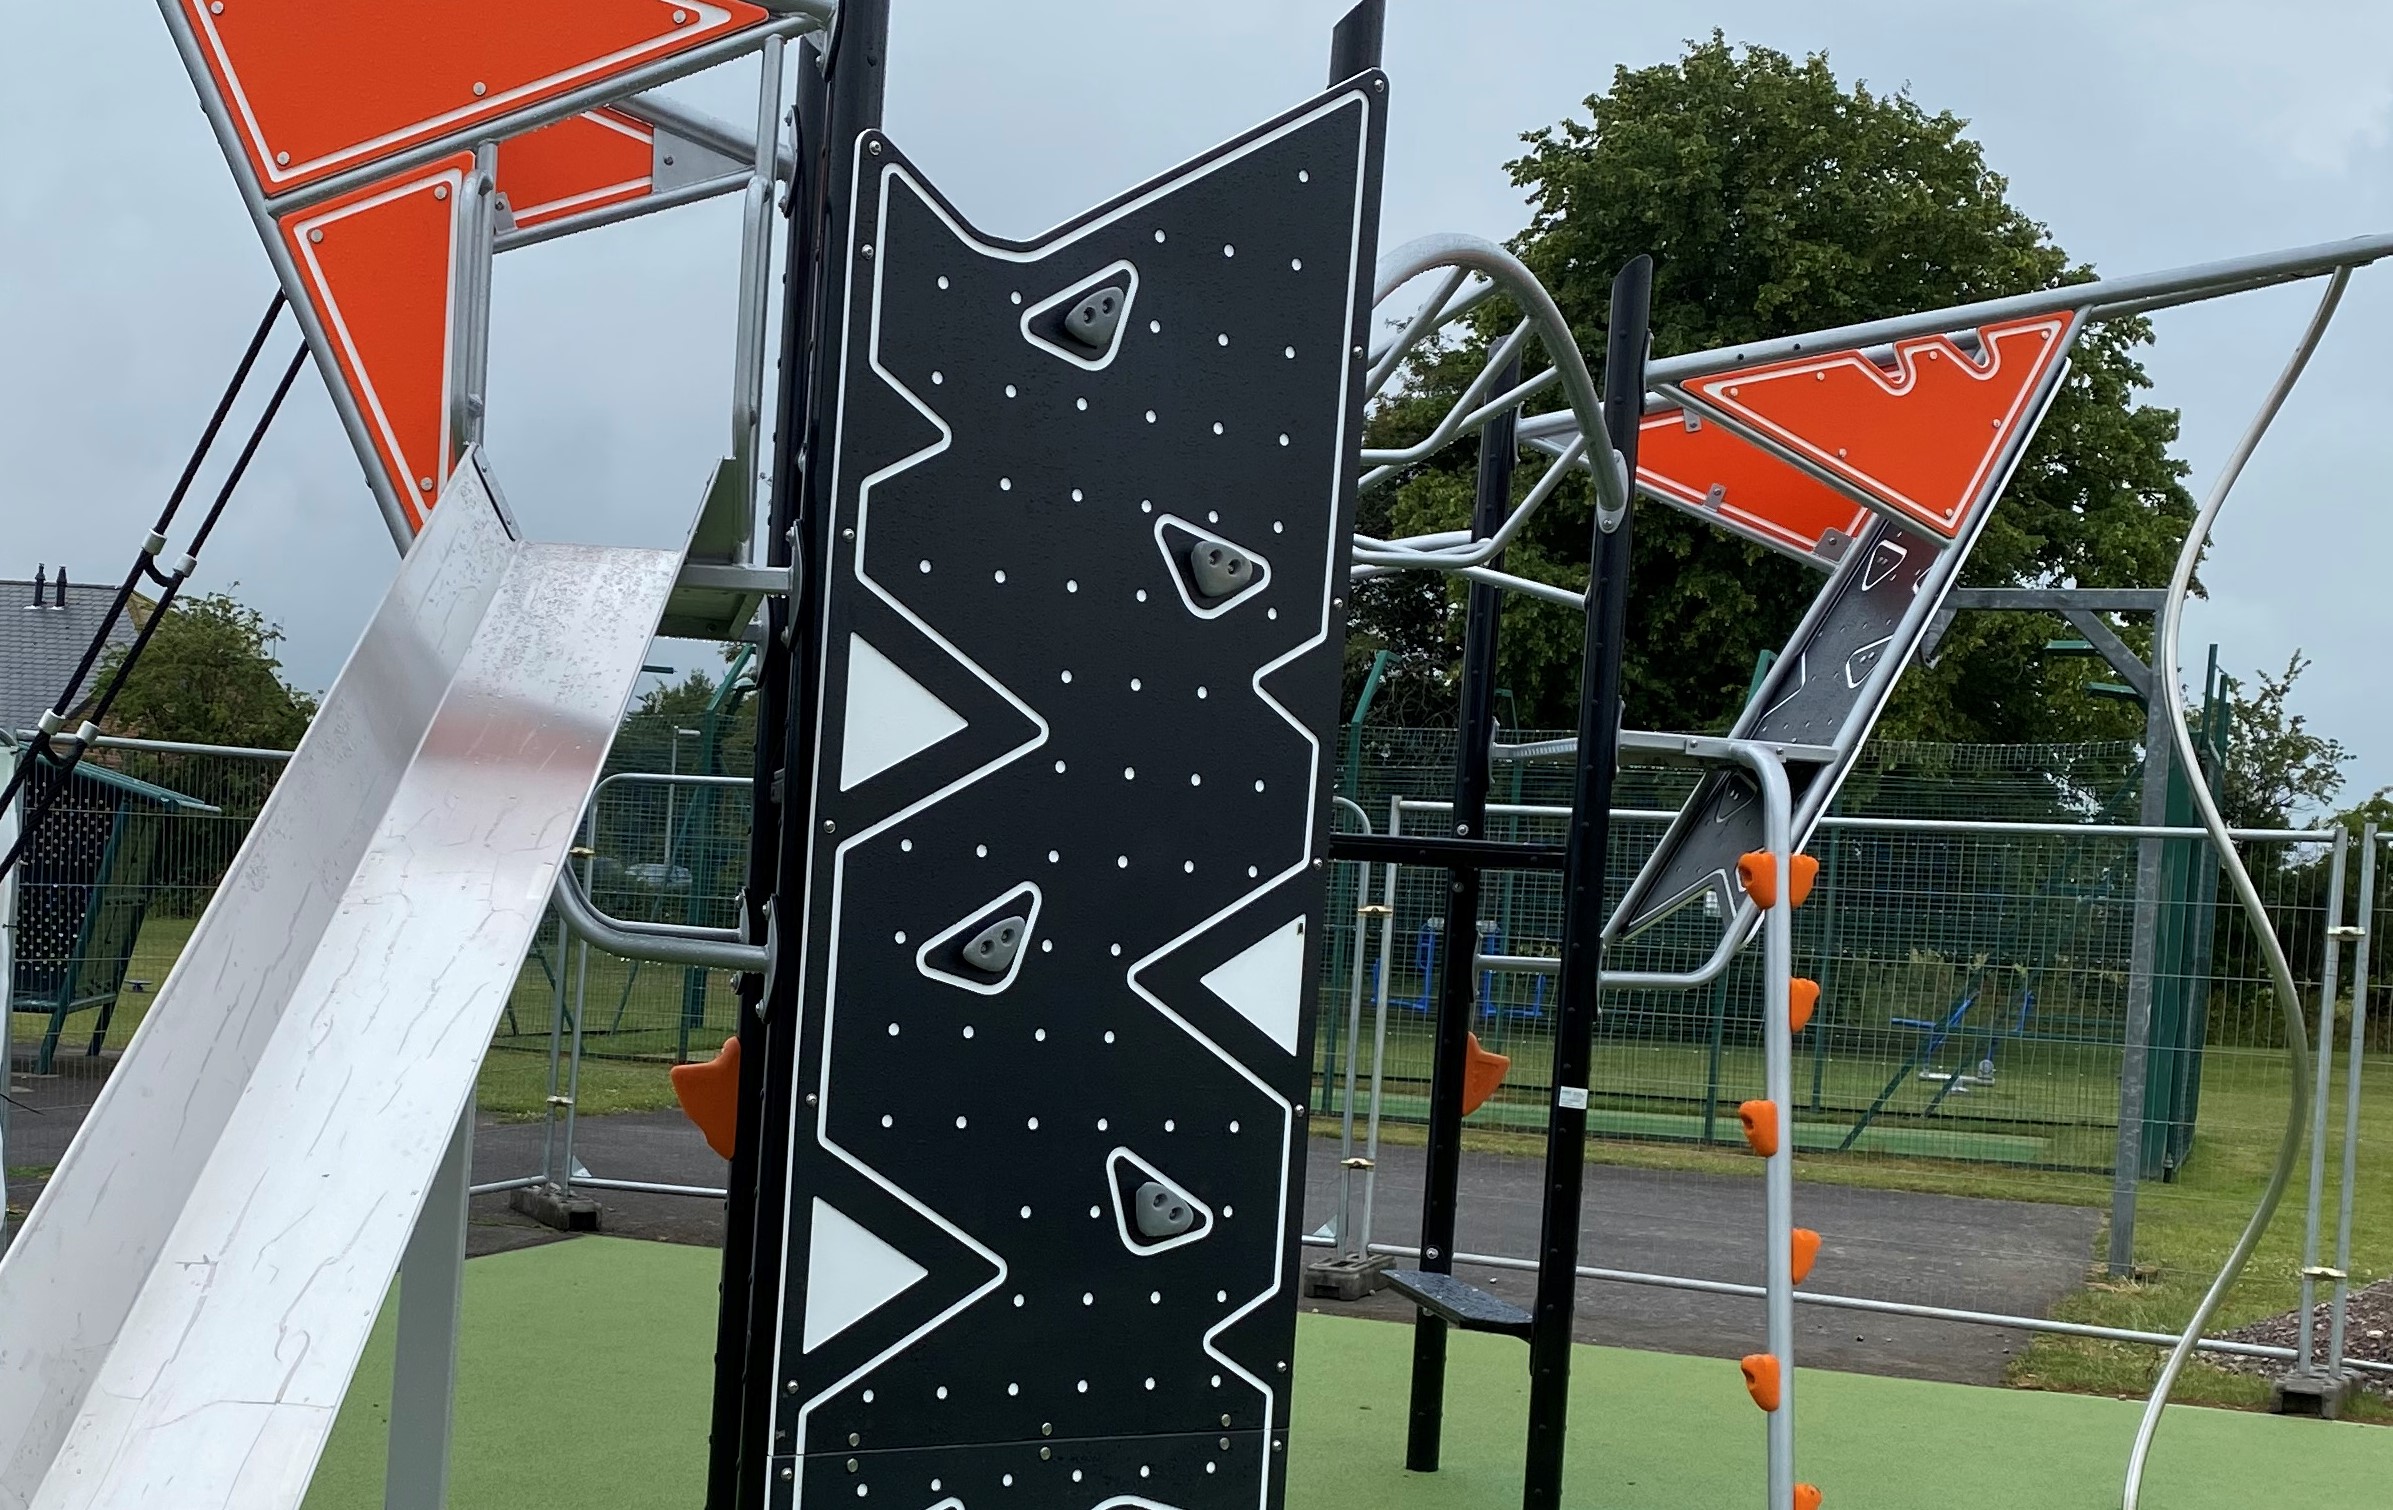 New Equipment in time for reopening of Tangmere Playground